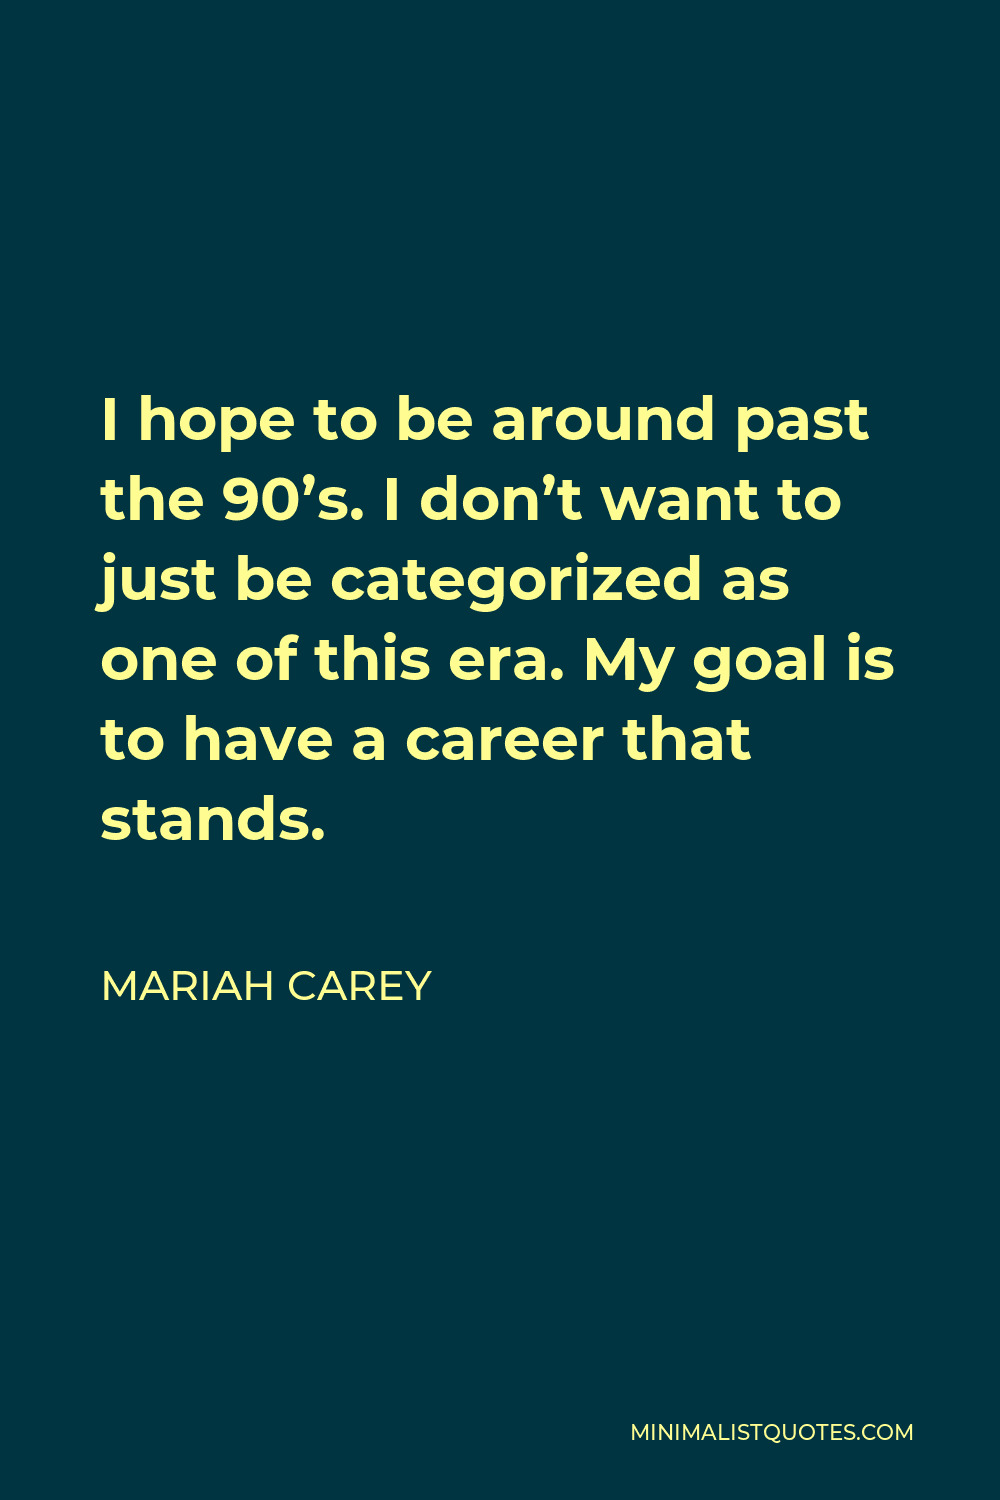 Mariah Carey Quote - I hope to be around past the 90’s. I don’t want to just be categorized as one of this era. My goal is to have a career that stands.